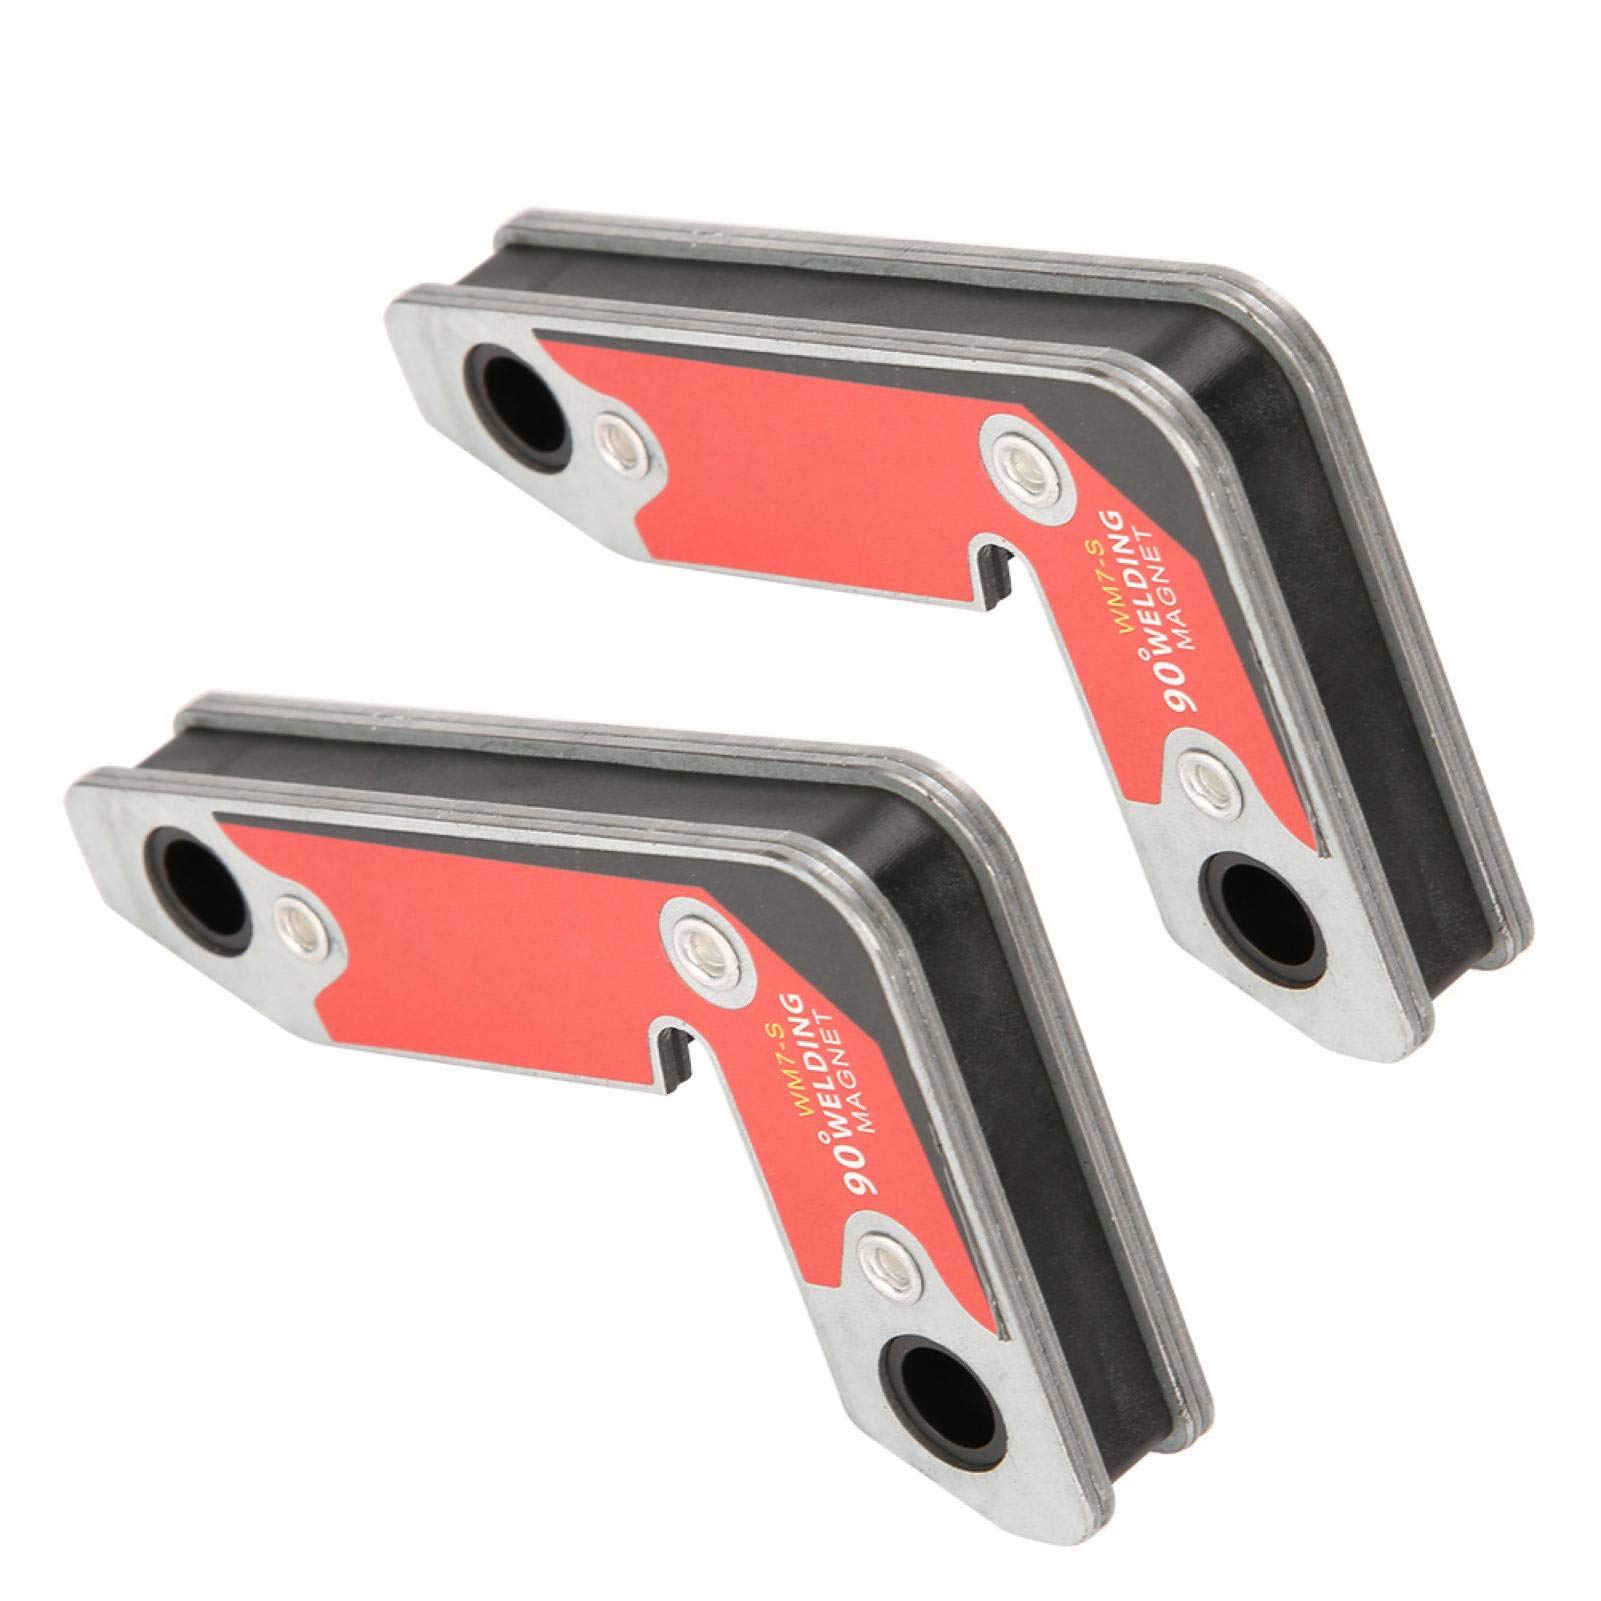 2pcs Magnetic Welding Holder, Strong Magnetic Welding Positioner Welding Magnet Arrows Welder Holder Support 30 60 90 Angles for Soldering, Marking Off, Pipe Installation